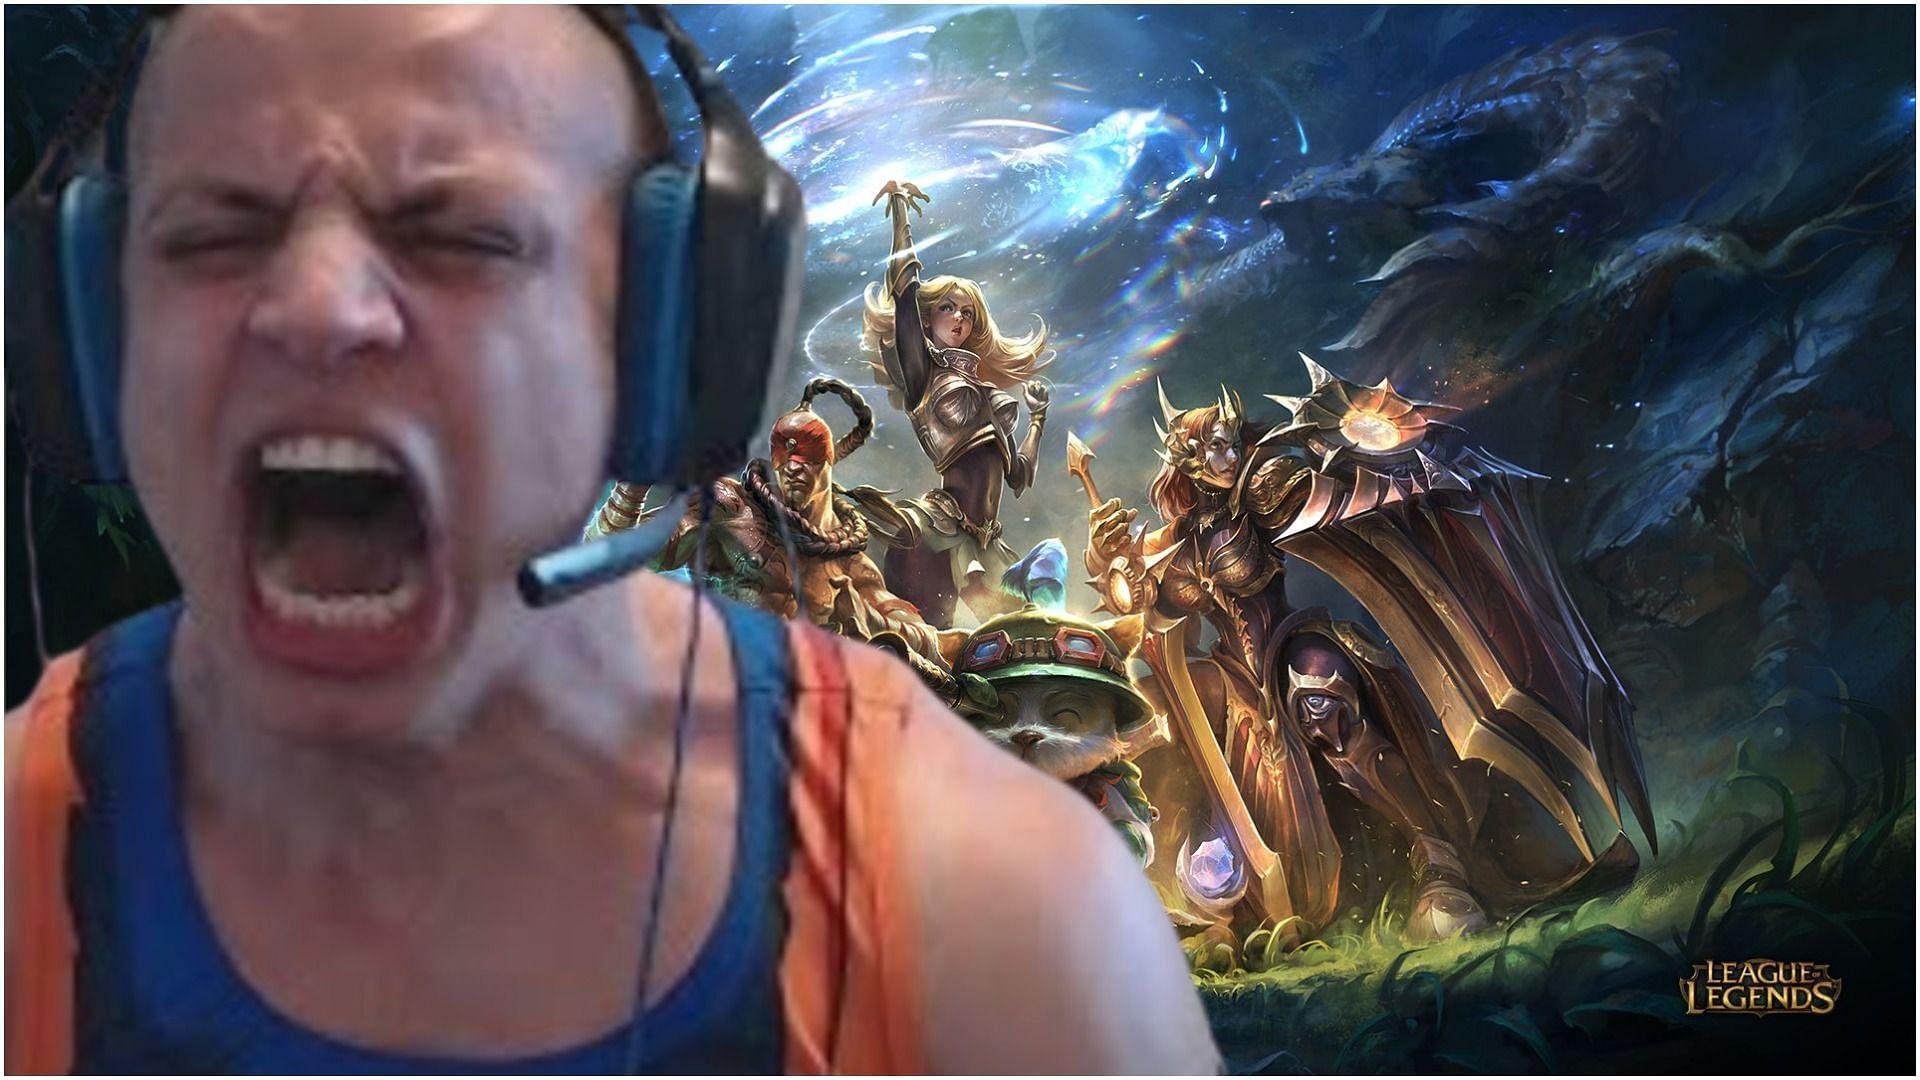 Tyler1 &ldquo;breaks in&rdquo; his new microphone in an unusual manner (Image via YouTube and WallpaperAcces)